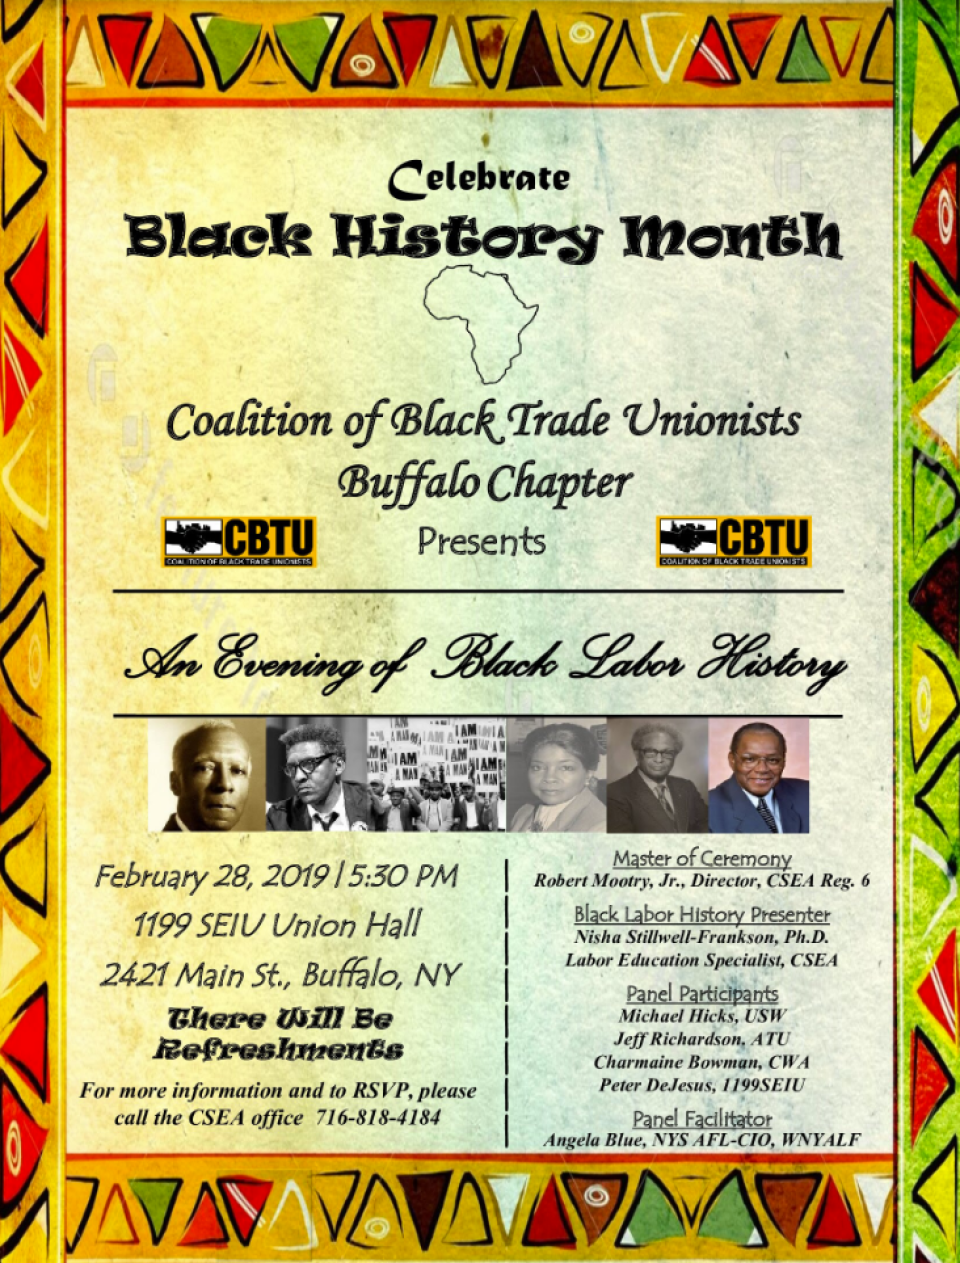 Evening of Black Labor History presented by CBTU Buffalo Chapter